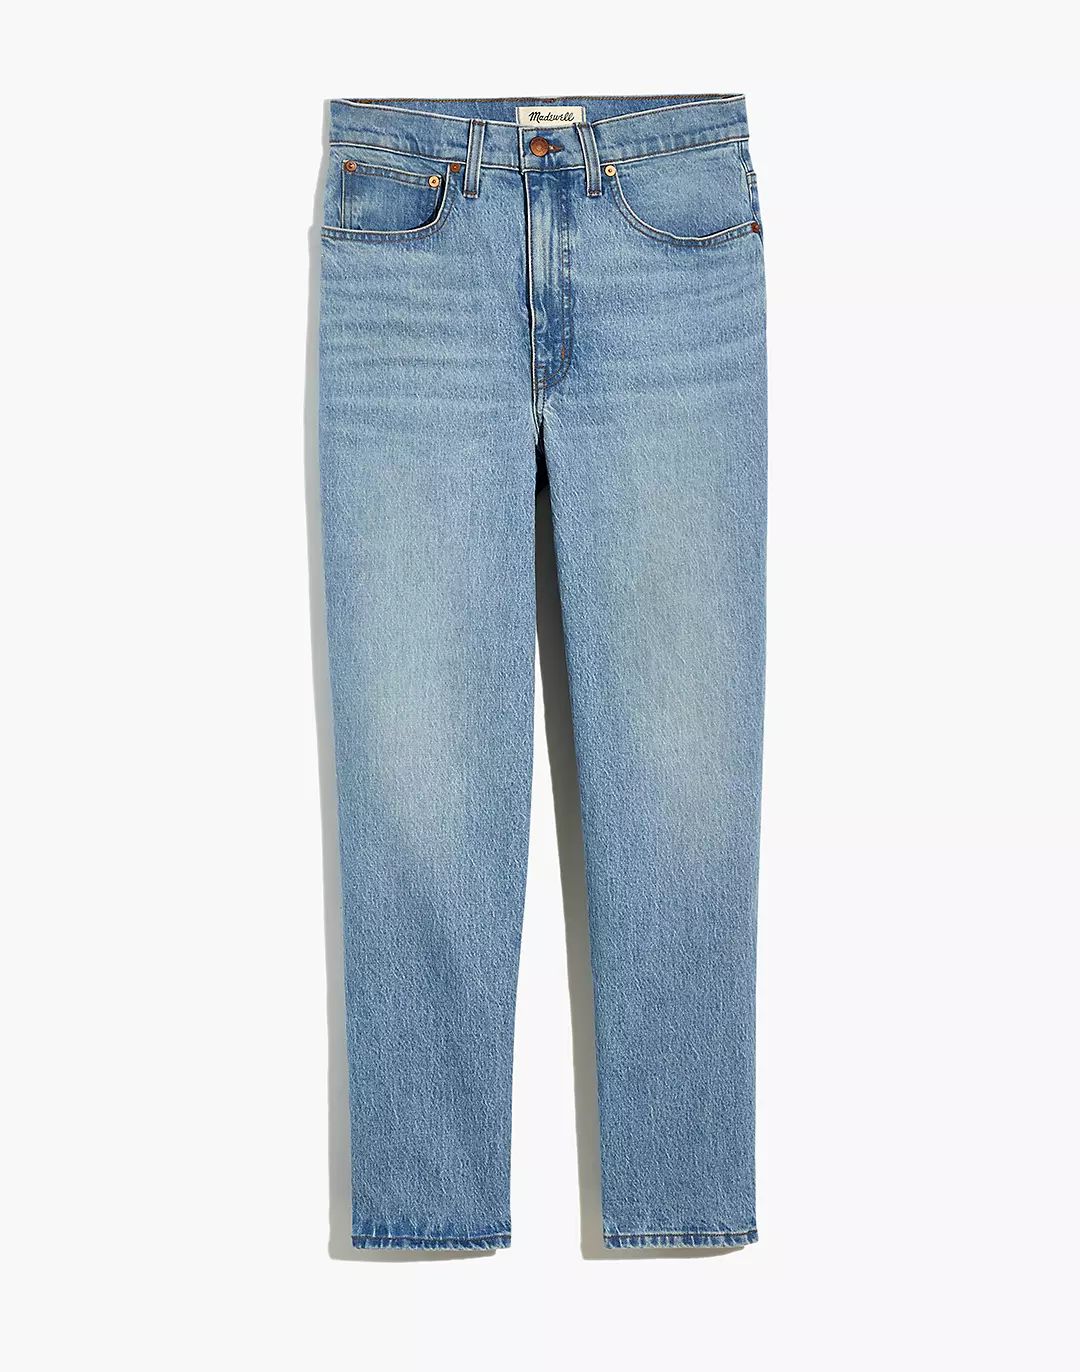 Balloon Jeans in Whistler Wash | Madewell